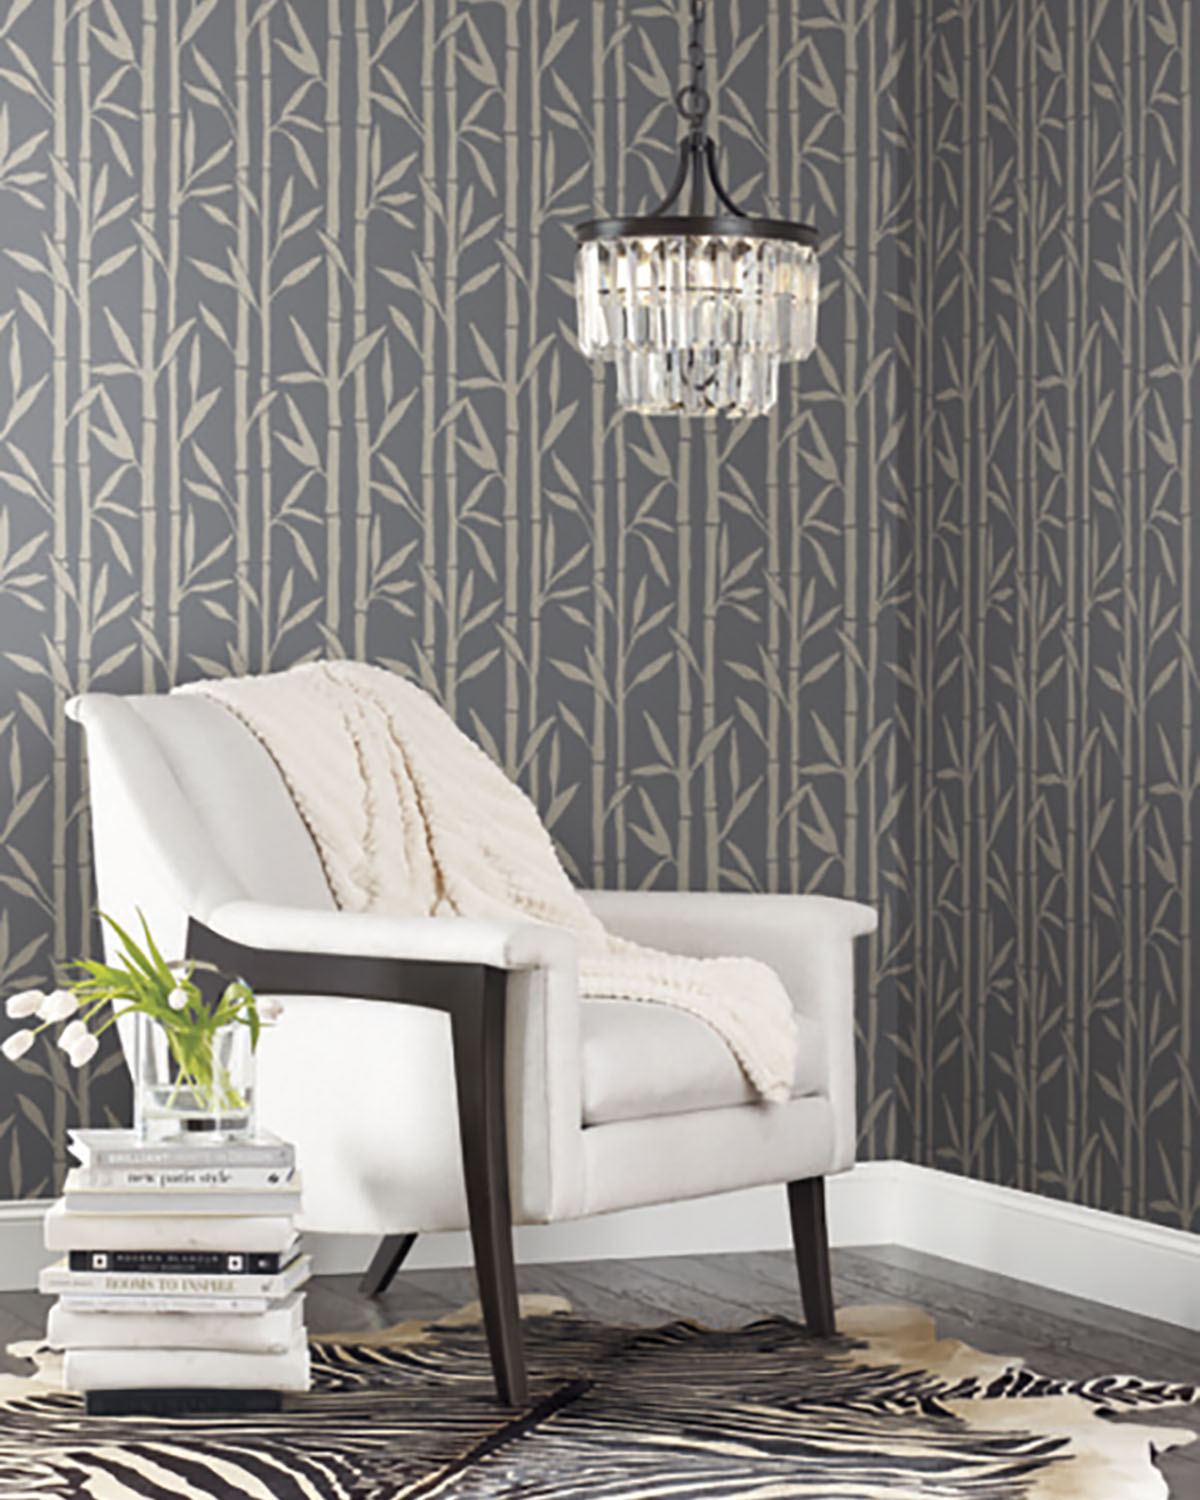 bamboo motif wallpaper with gold on a gray background